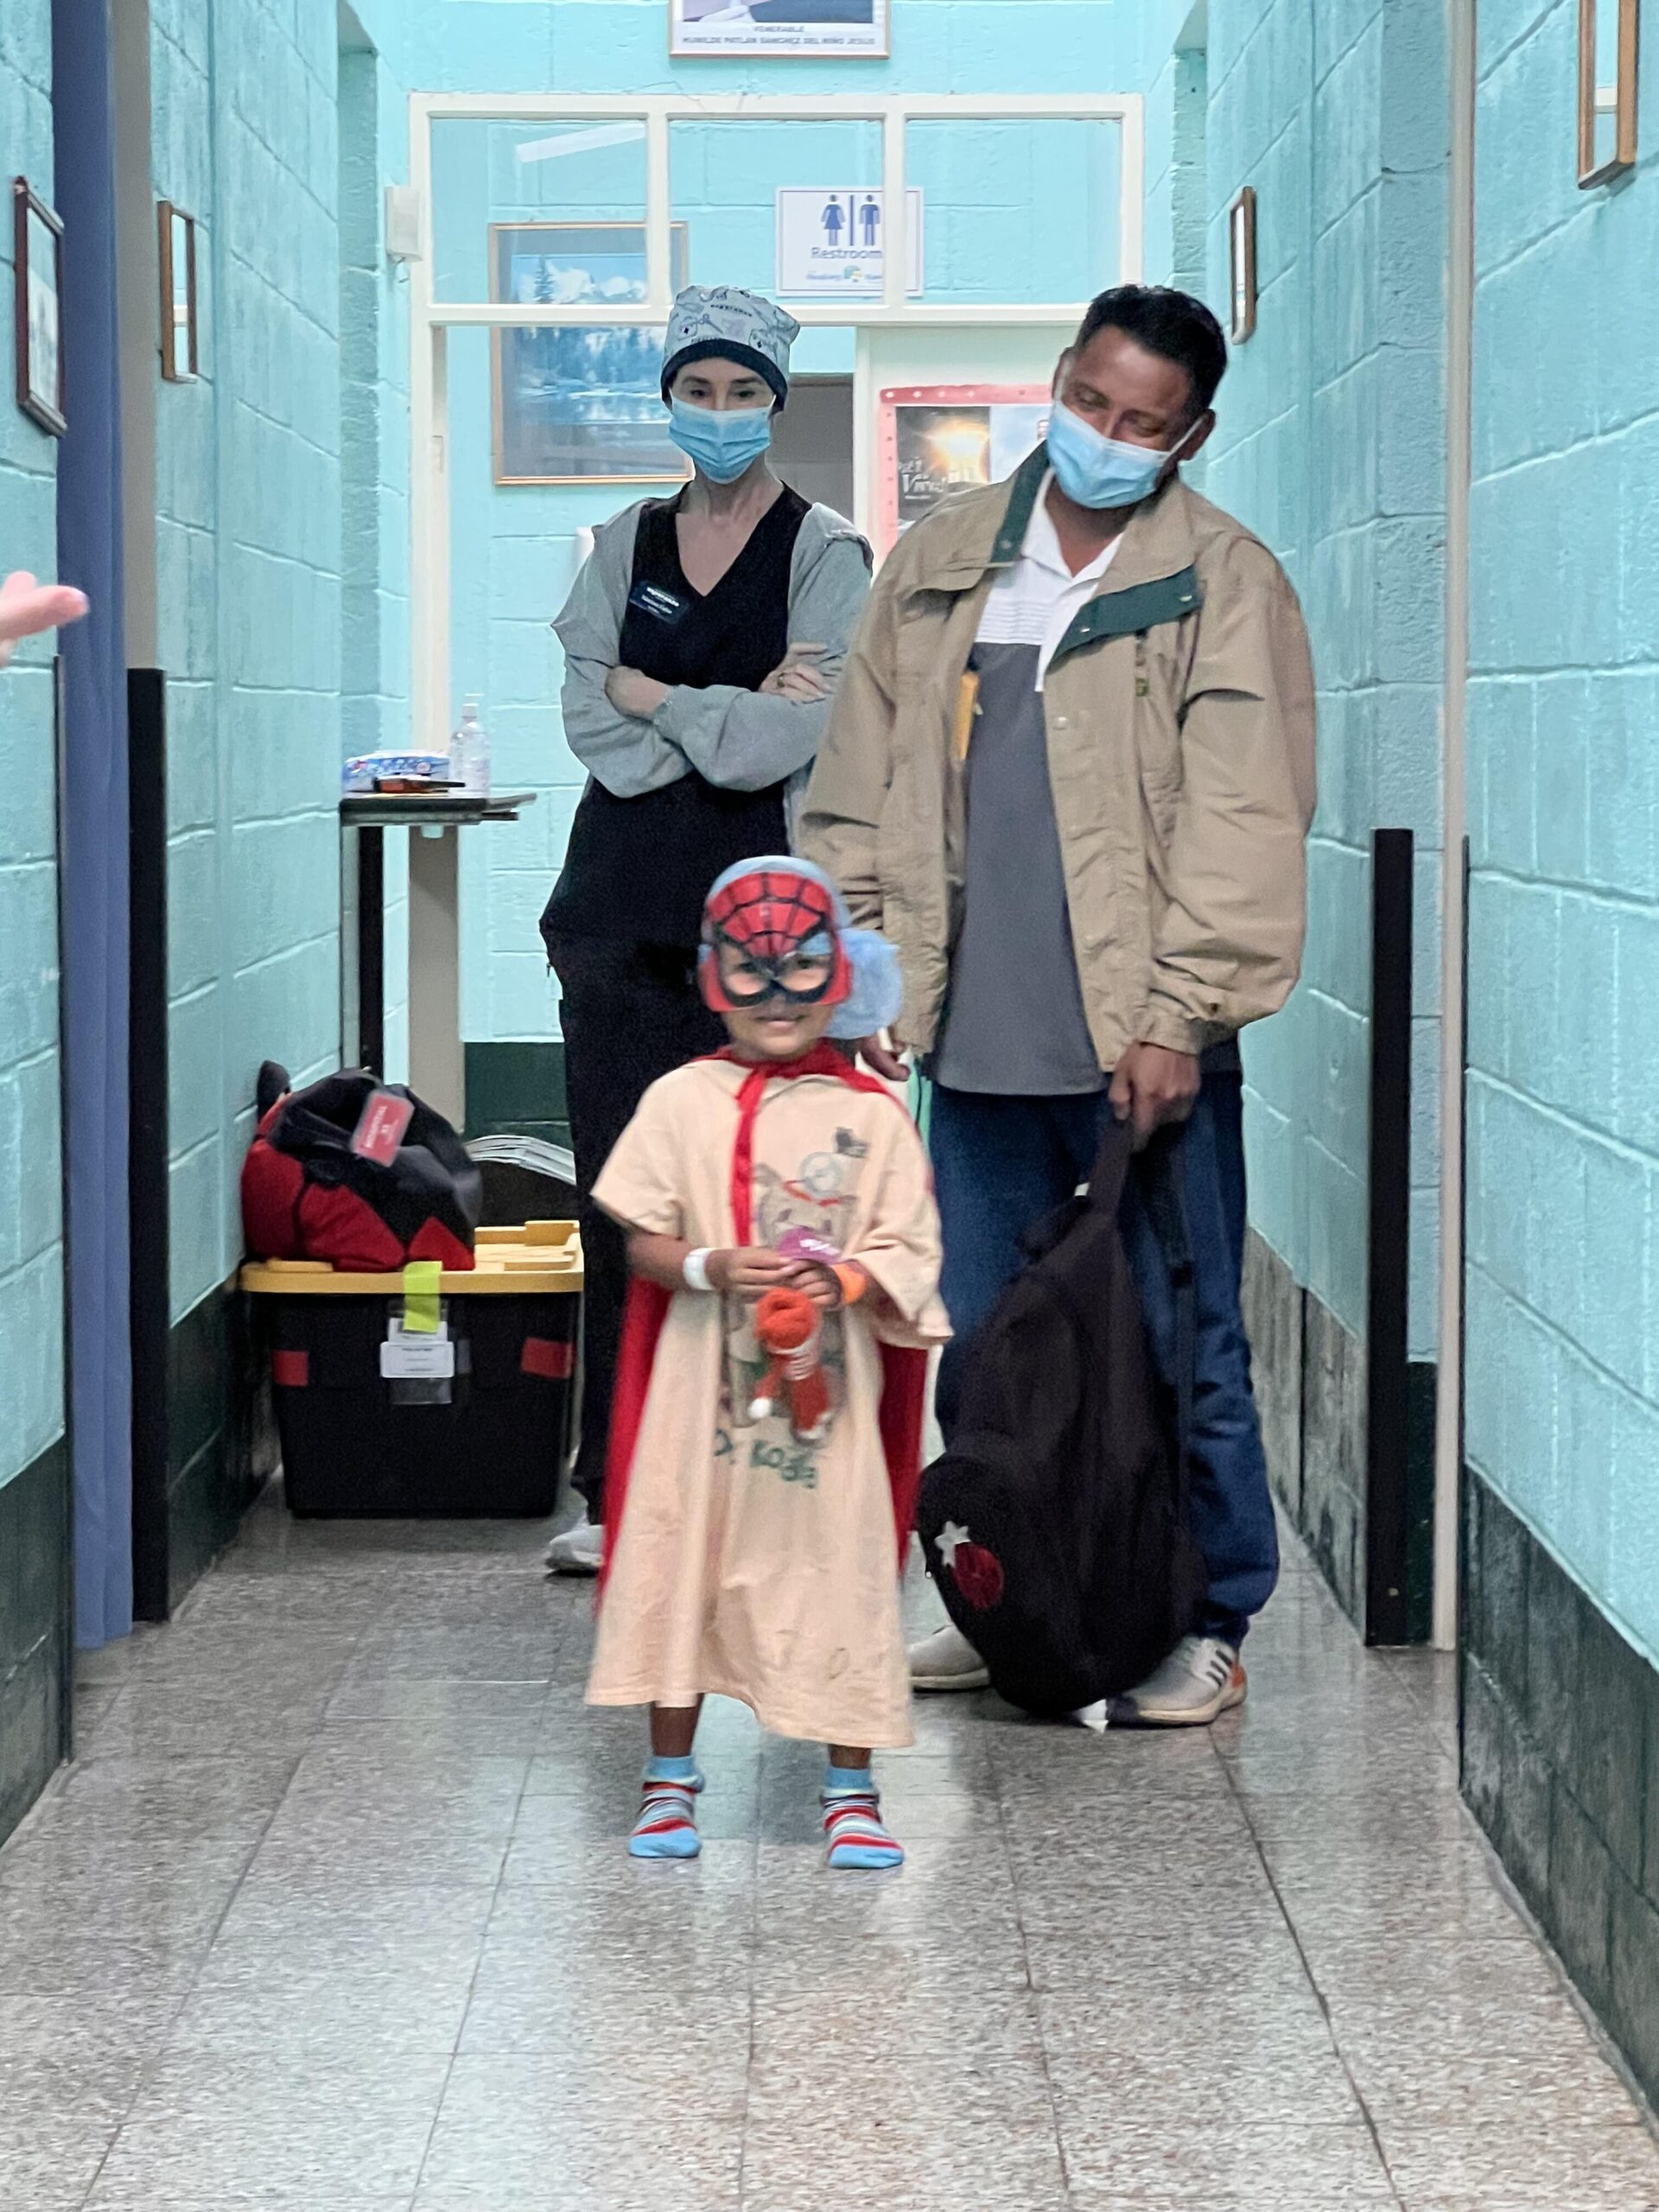 A young patient in surgical scrubs and a Spider-Man mask poses with his father and a Sanford Health nurse in the hallway of a Guatemalan hospital.